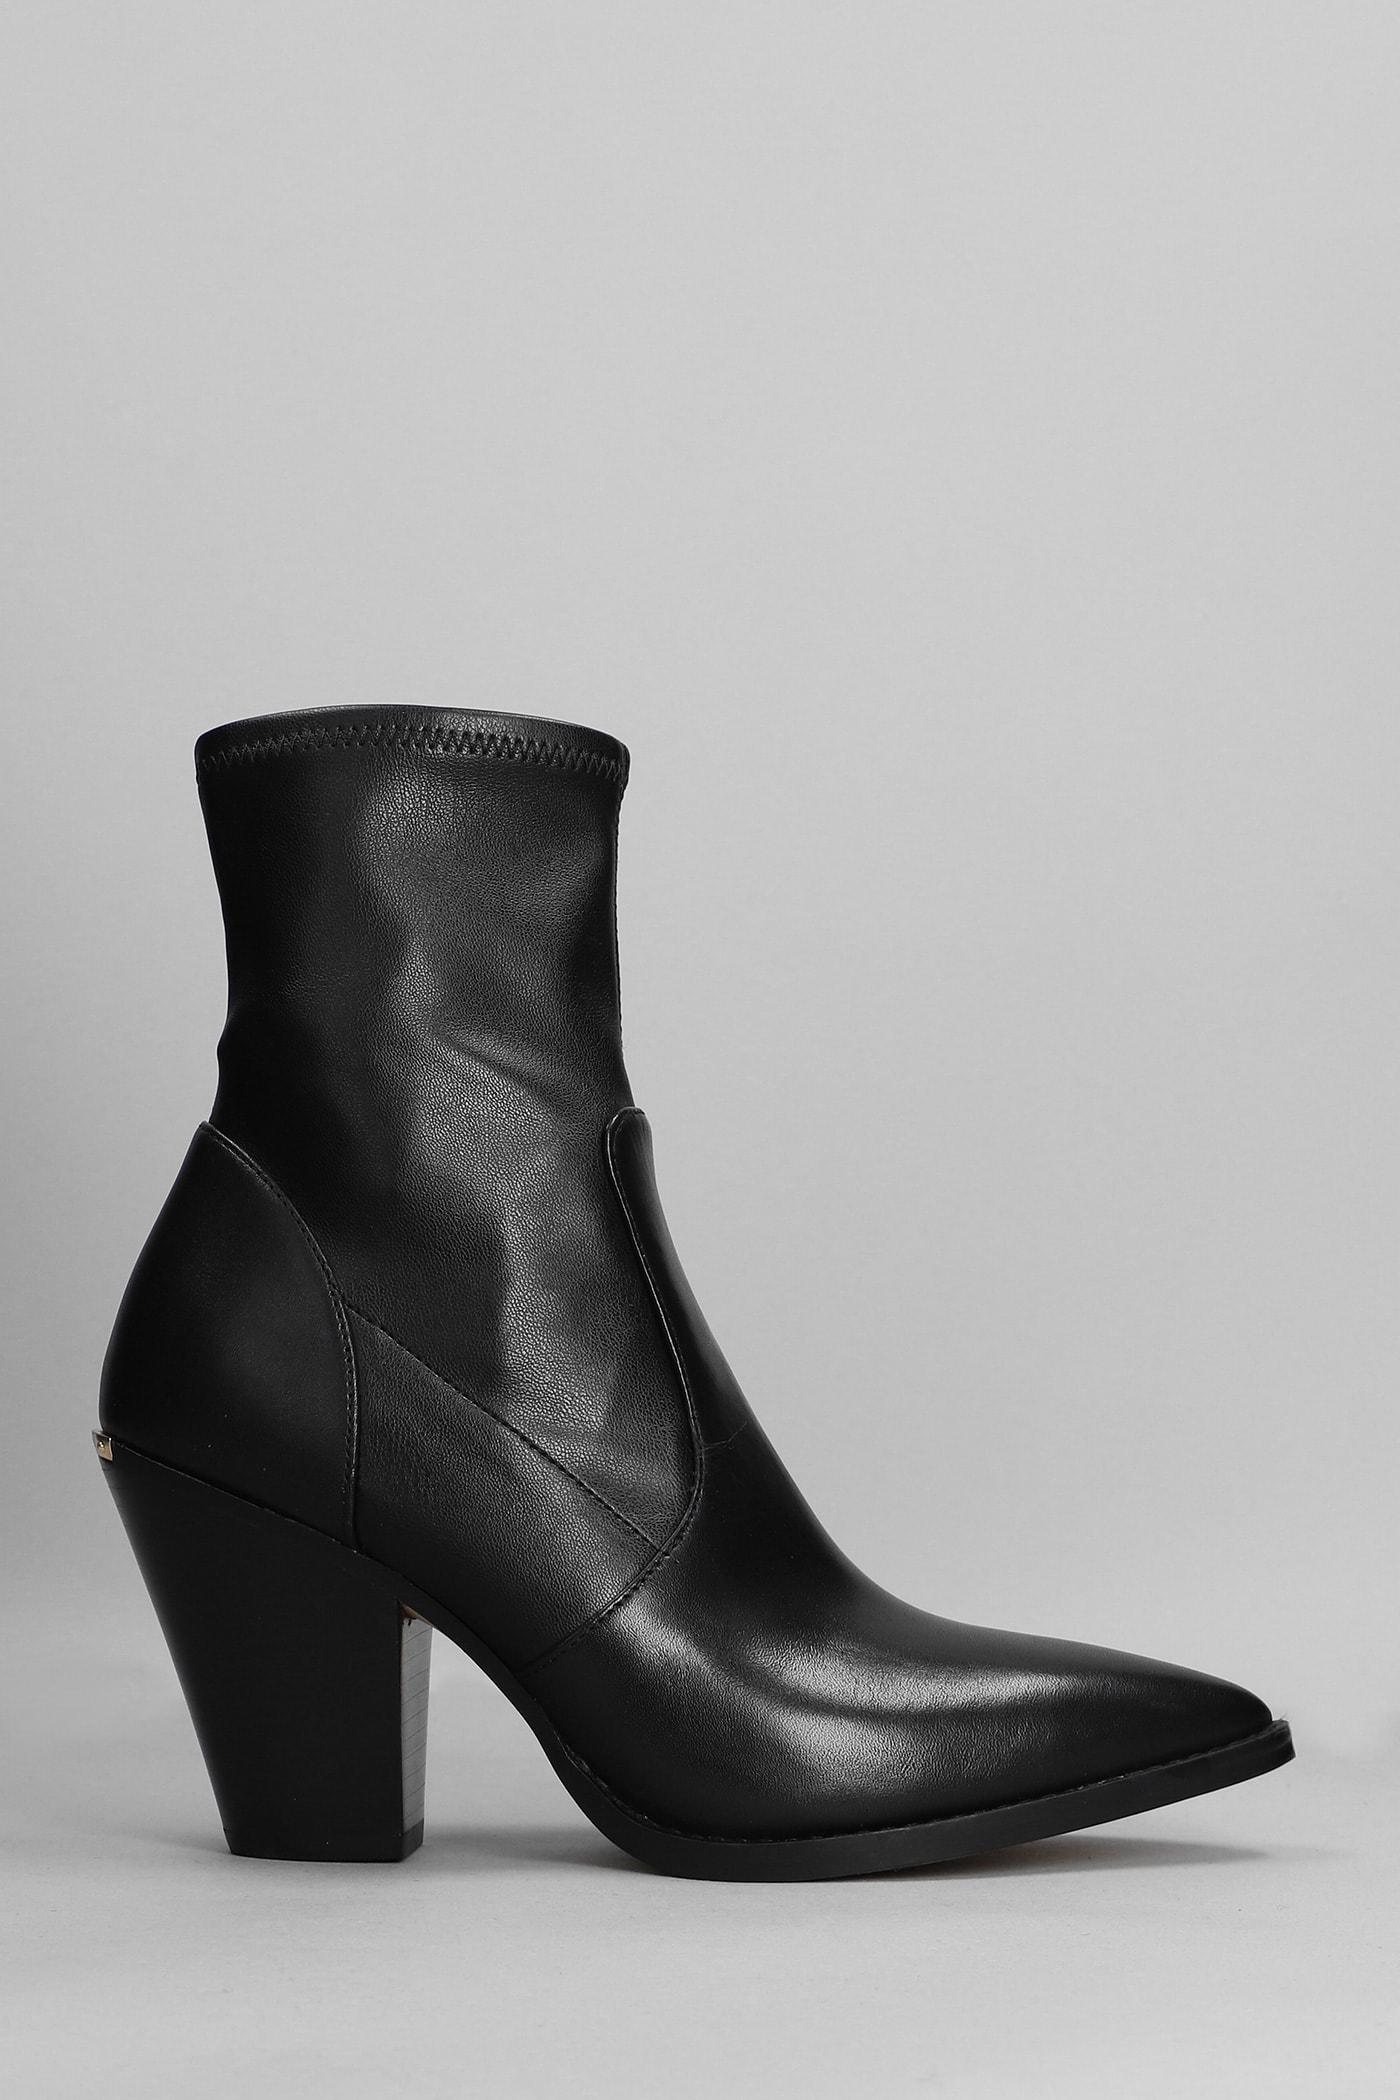 Michael Kors Dover Heeled High Heels Ankle Boots In Black Leather | Lyst UK